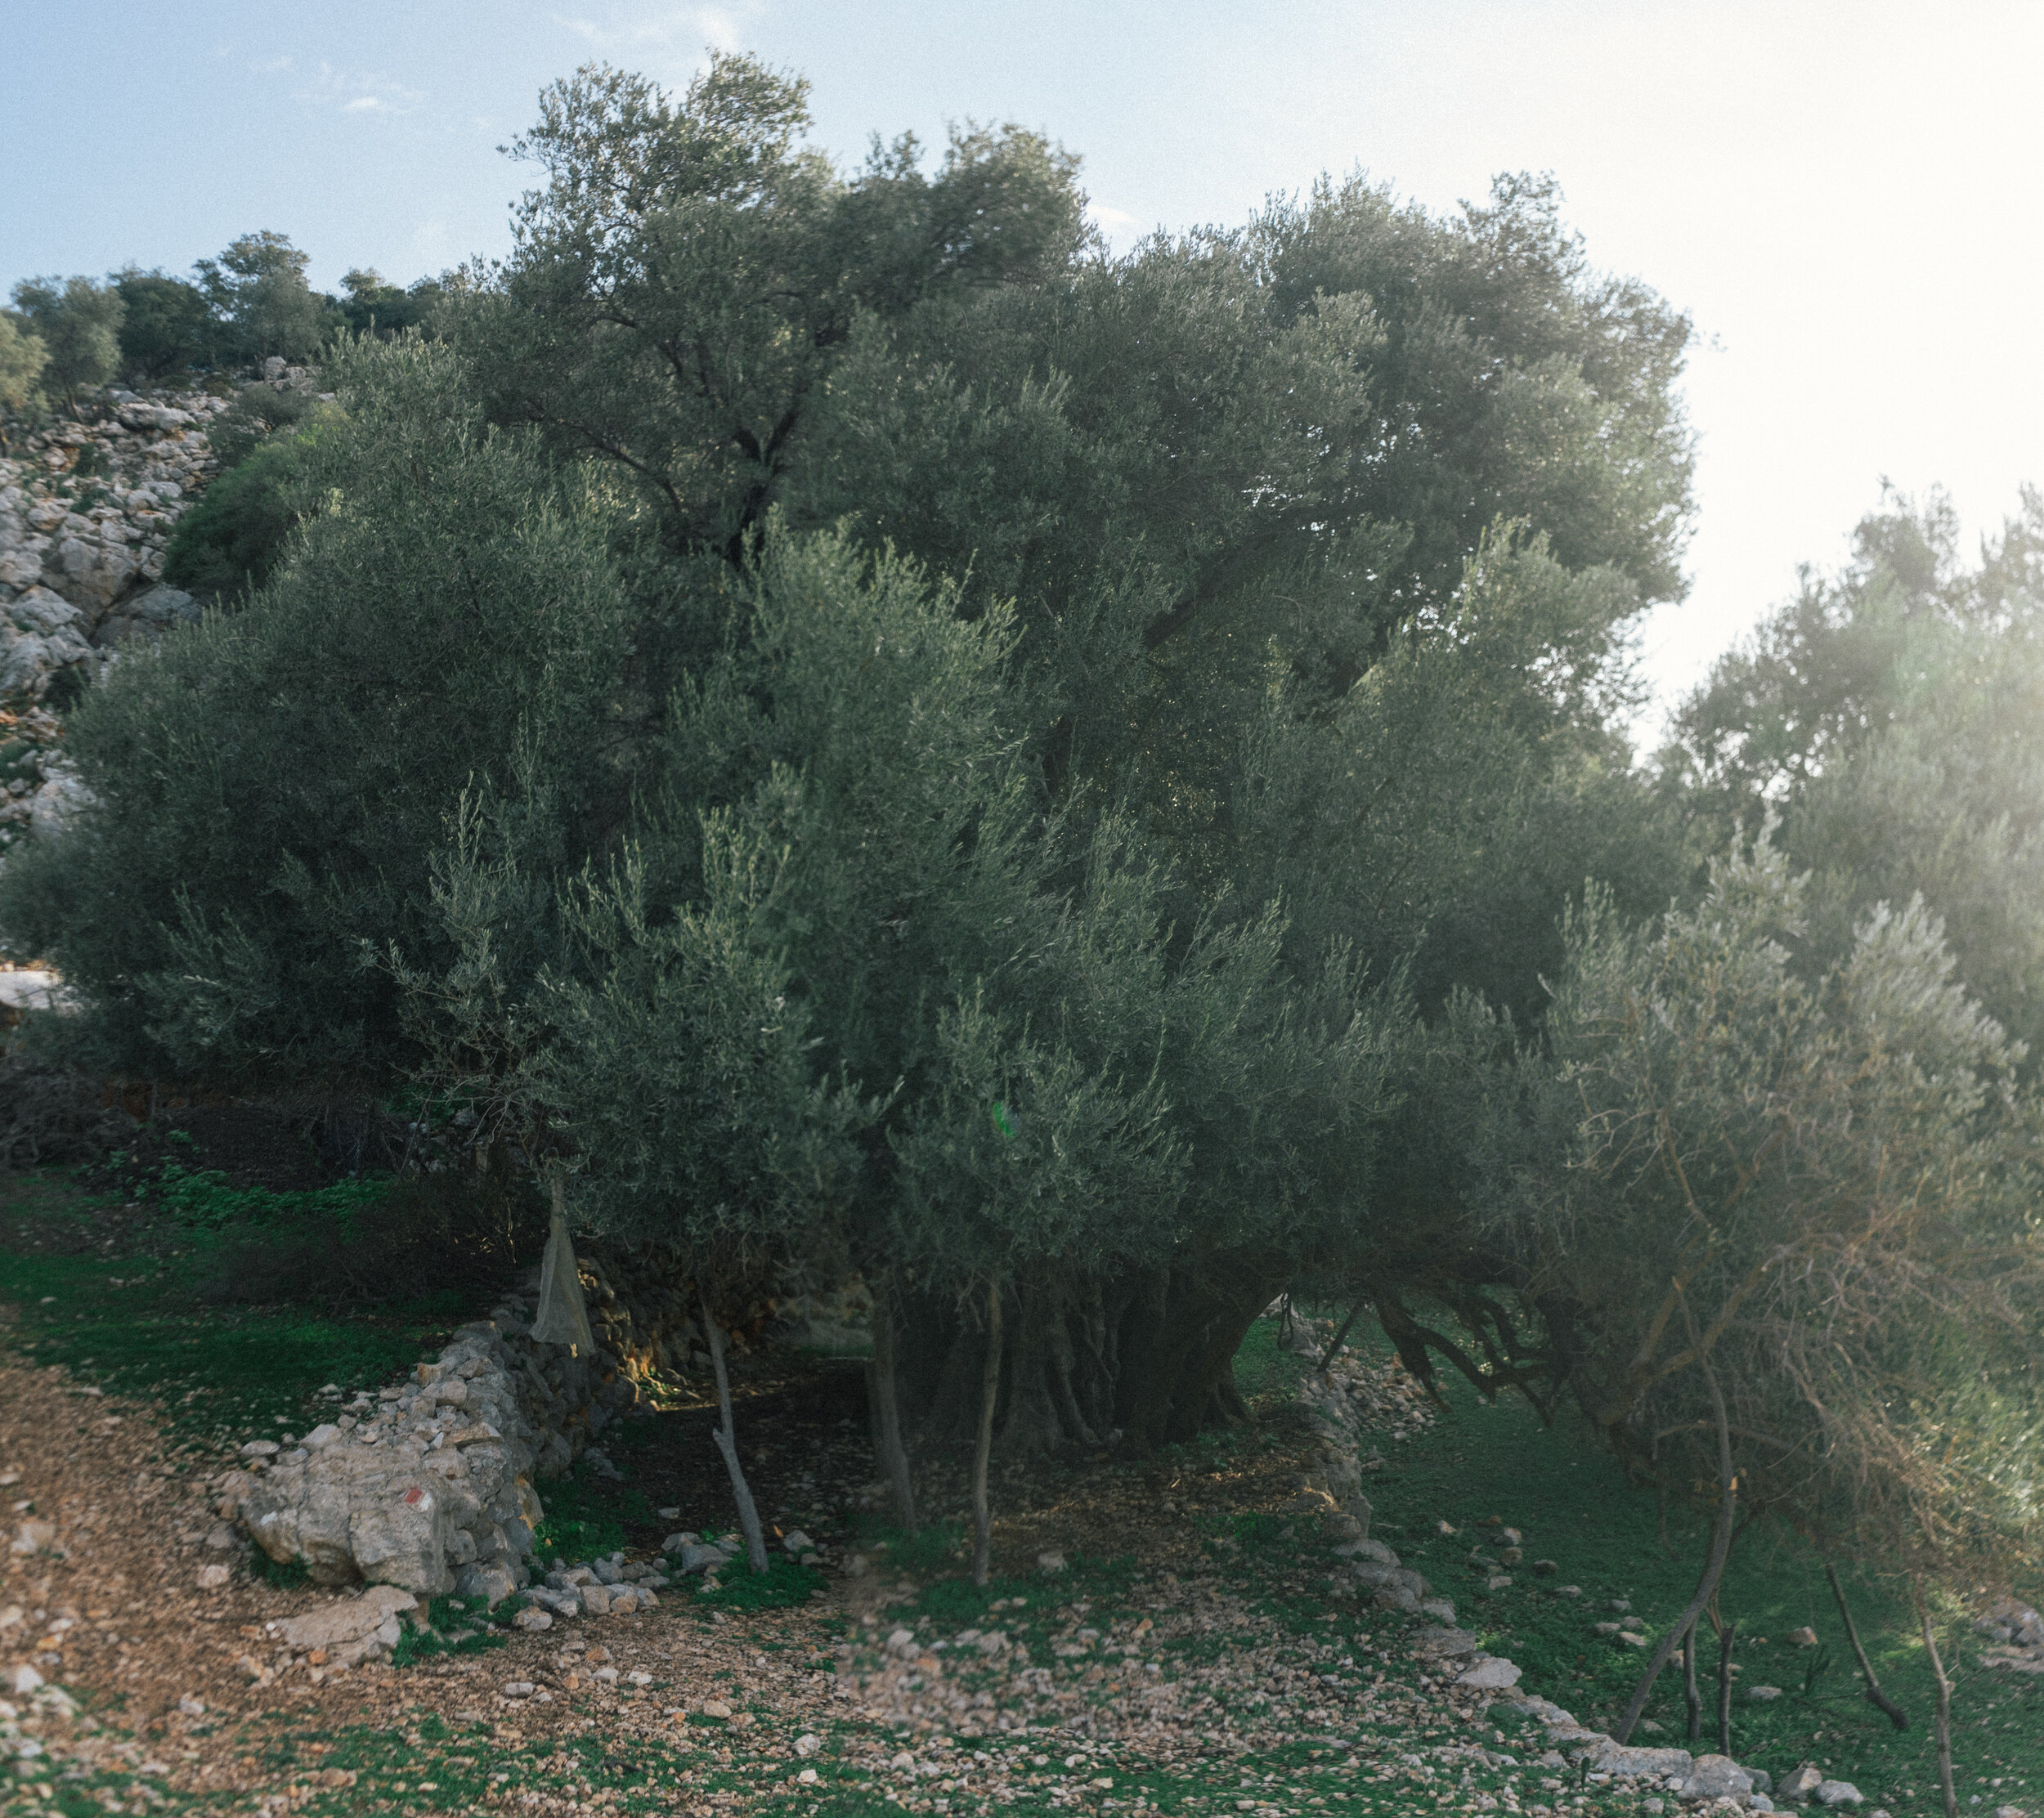 An ancient olive tree found on the way to Gey